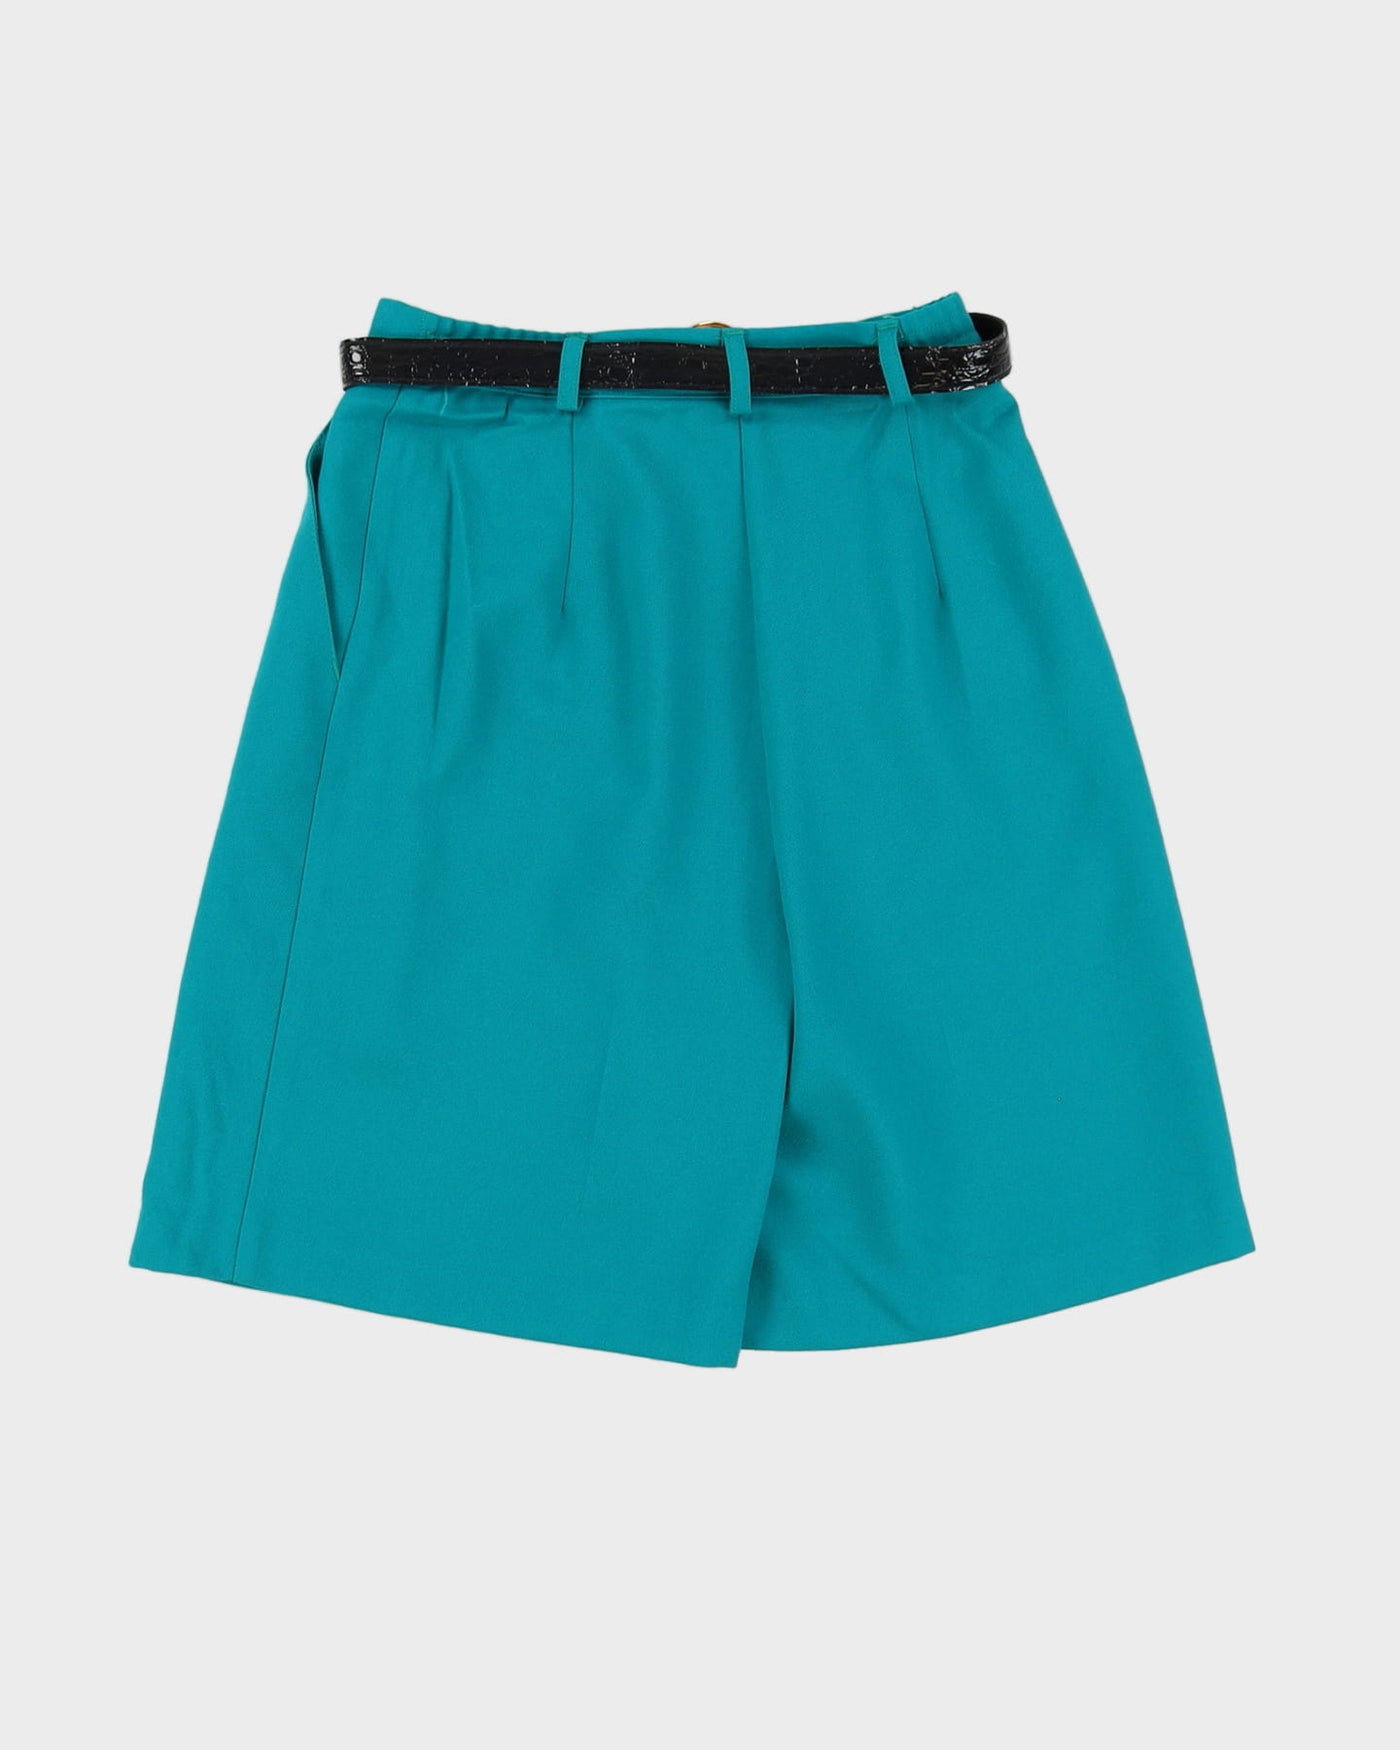 1990s Green High Waisted Shorts - S